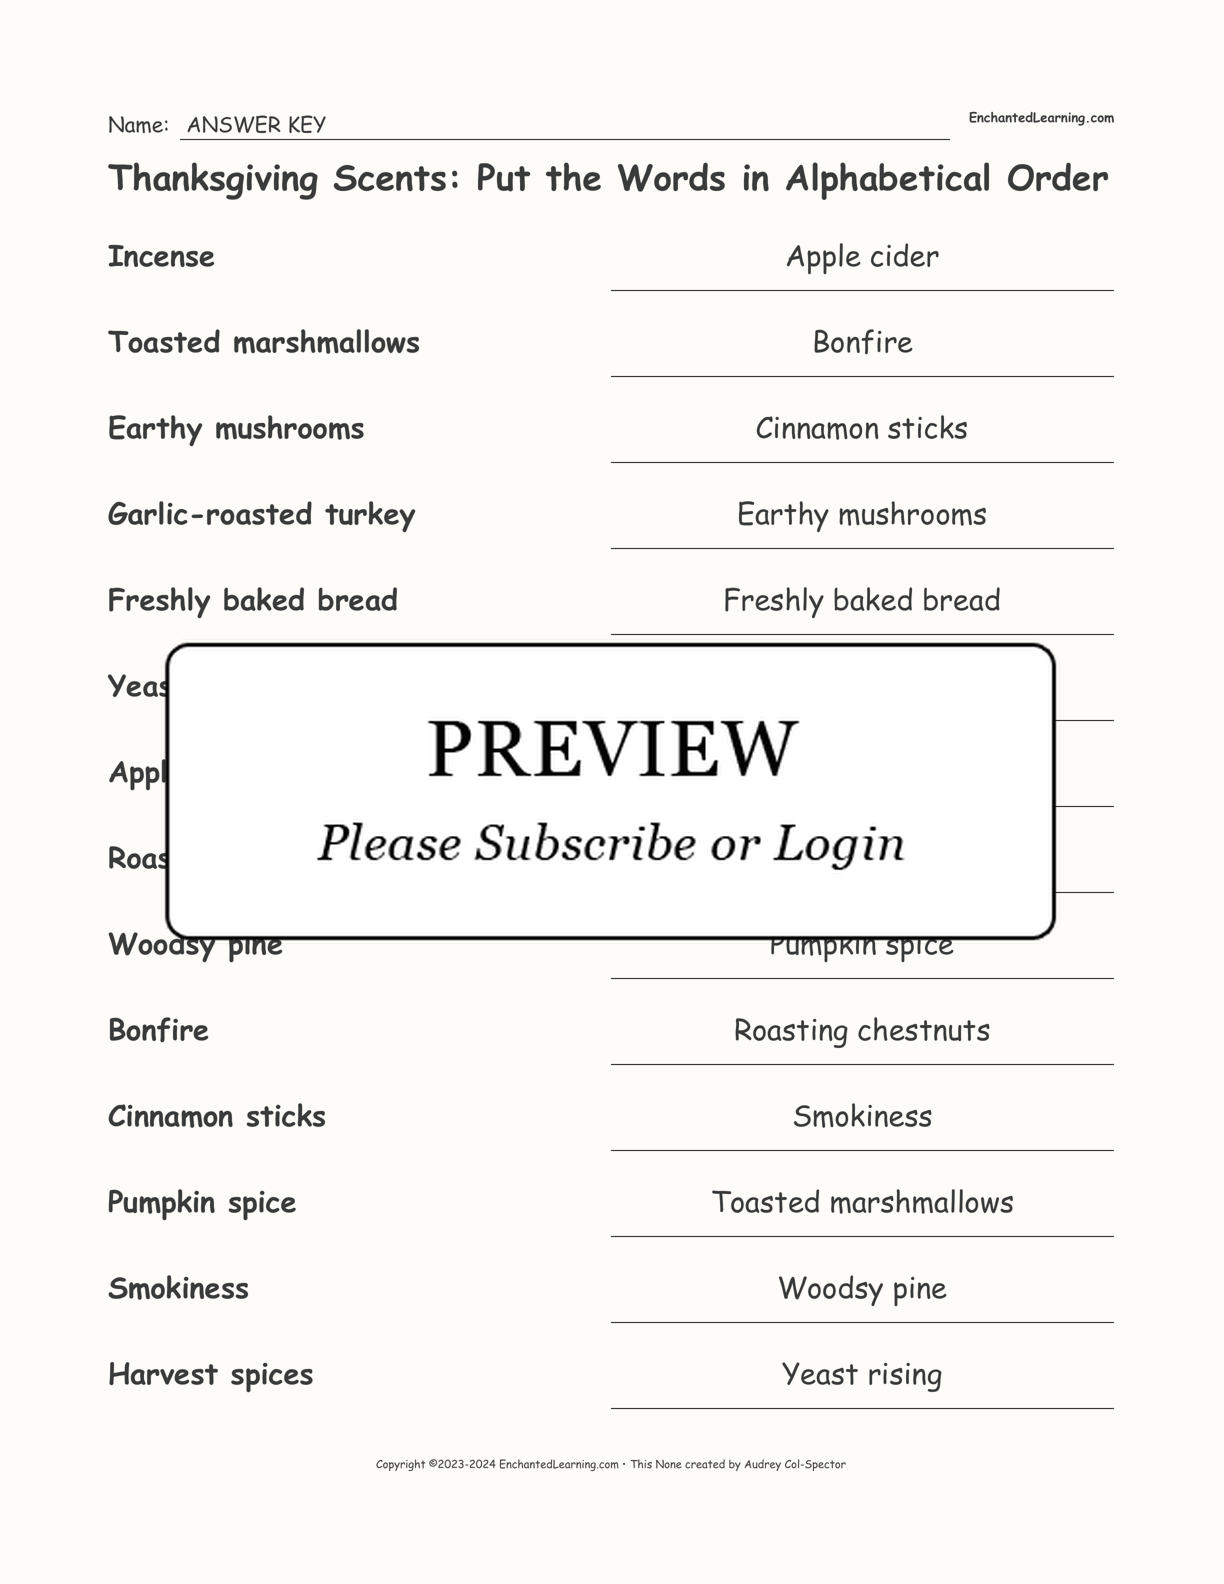 Thanksgiving Scents: Put the Words in Alphabetical Order interactive worksheet page 2